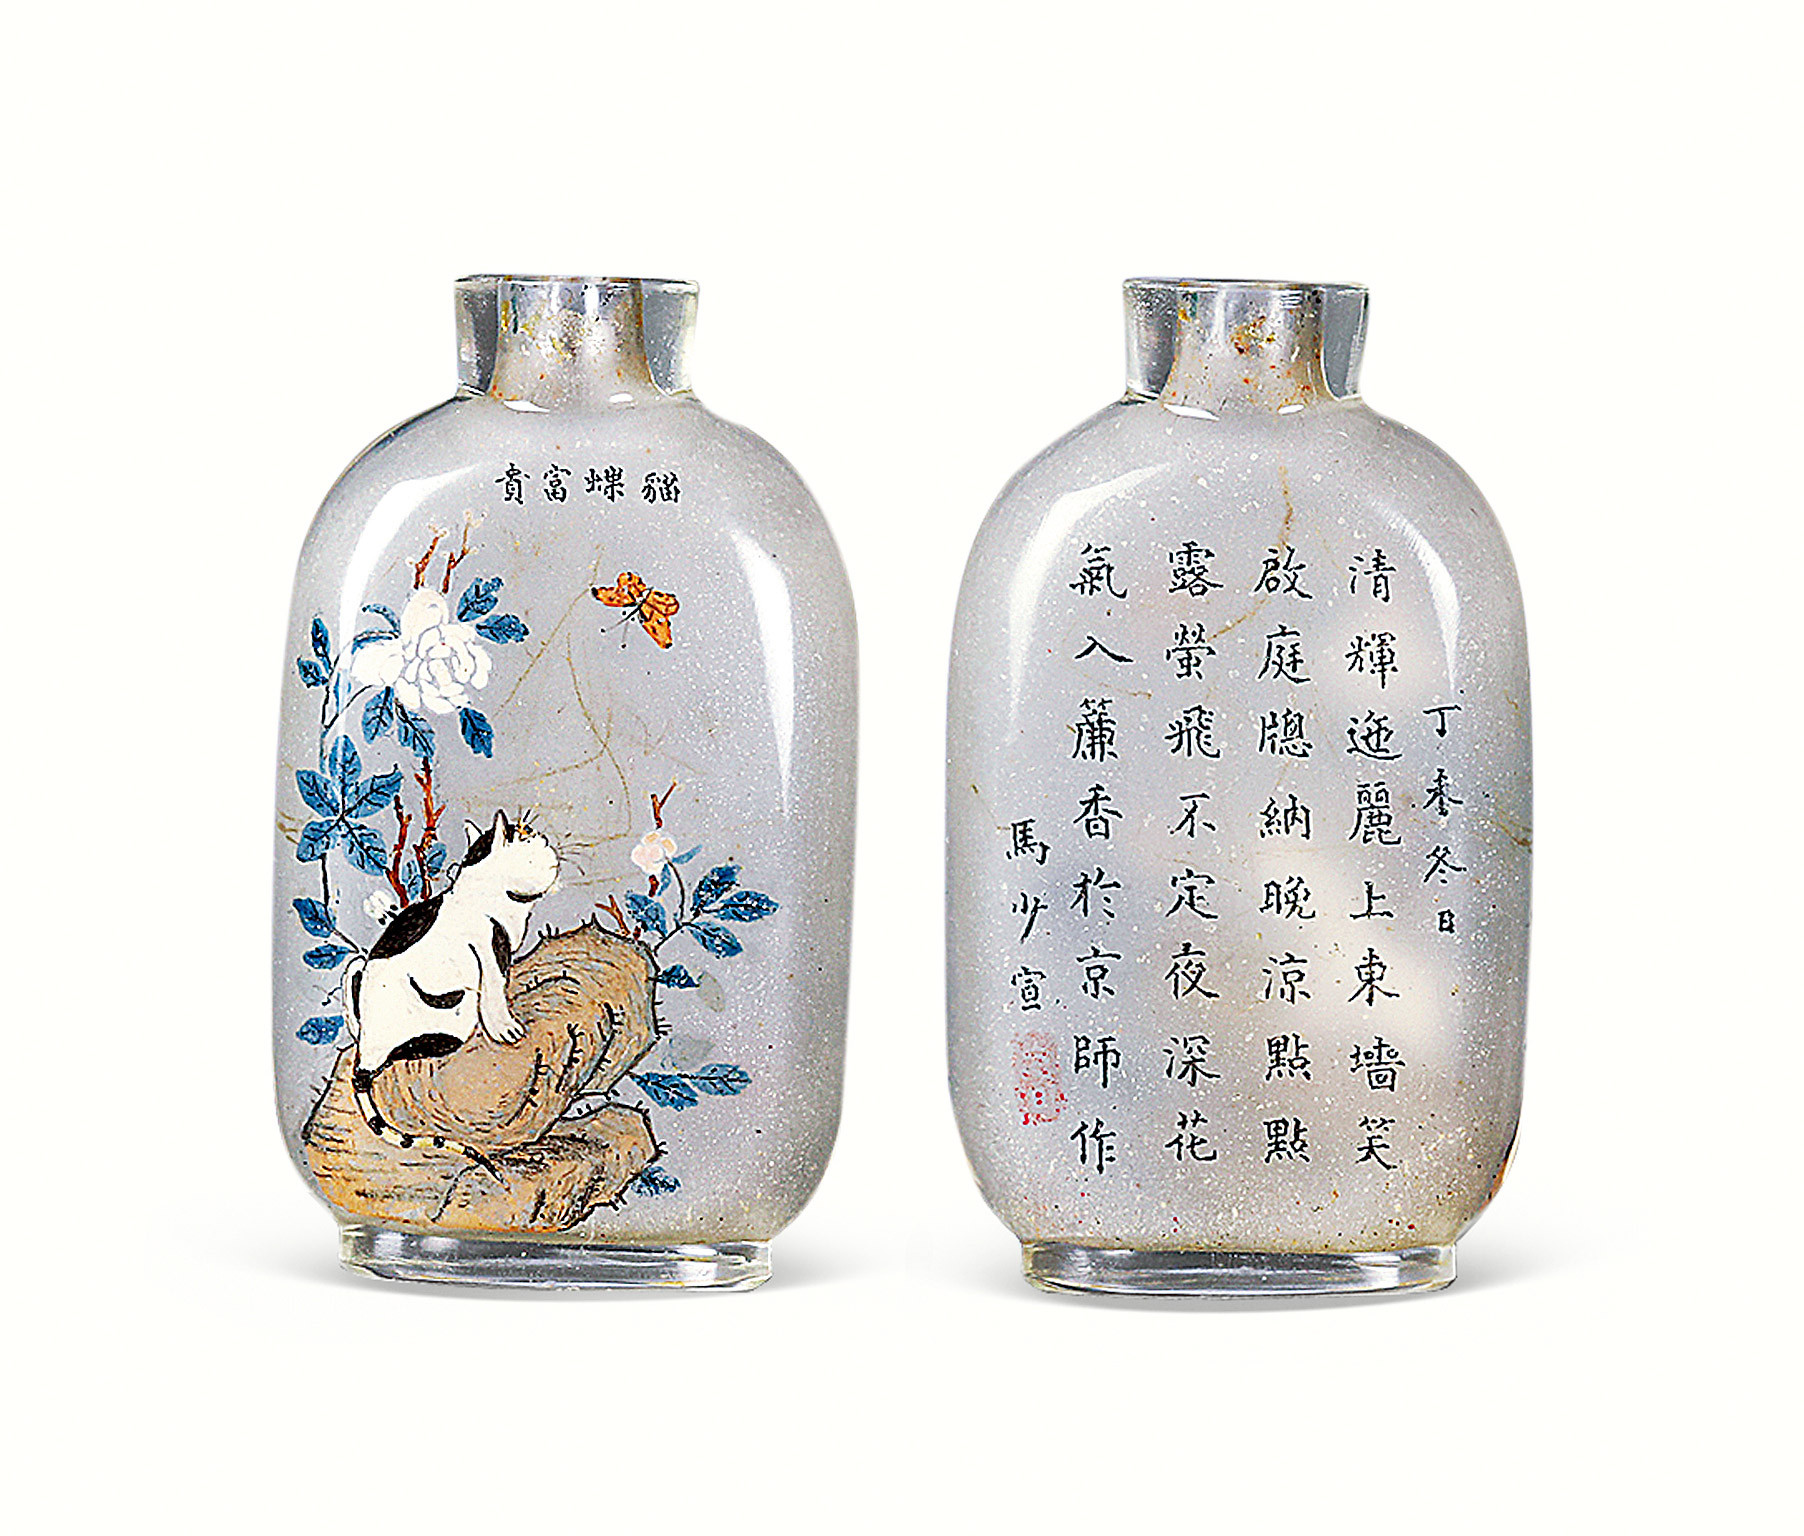 AN INNER-PAINTED SNUFF BOTTLE